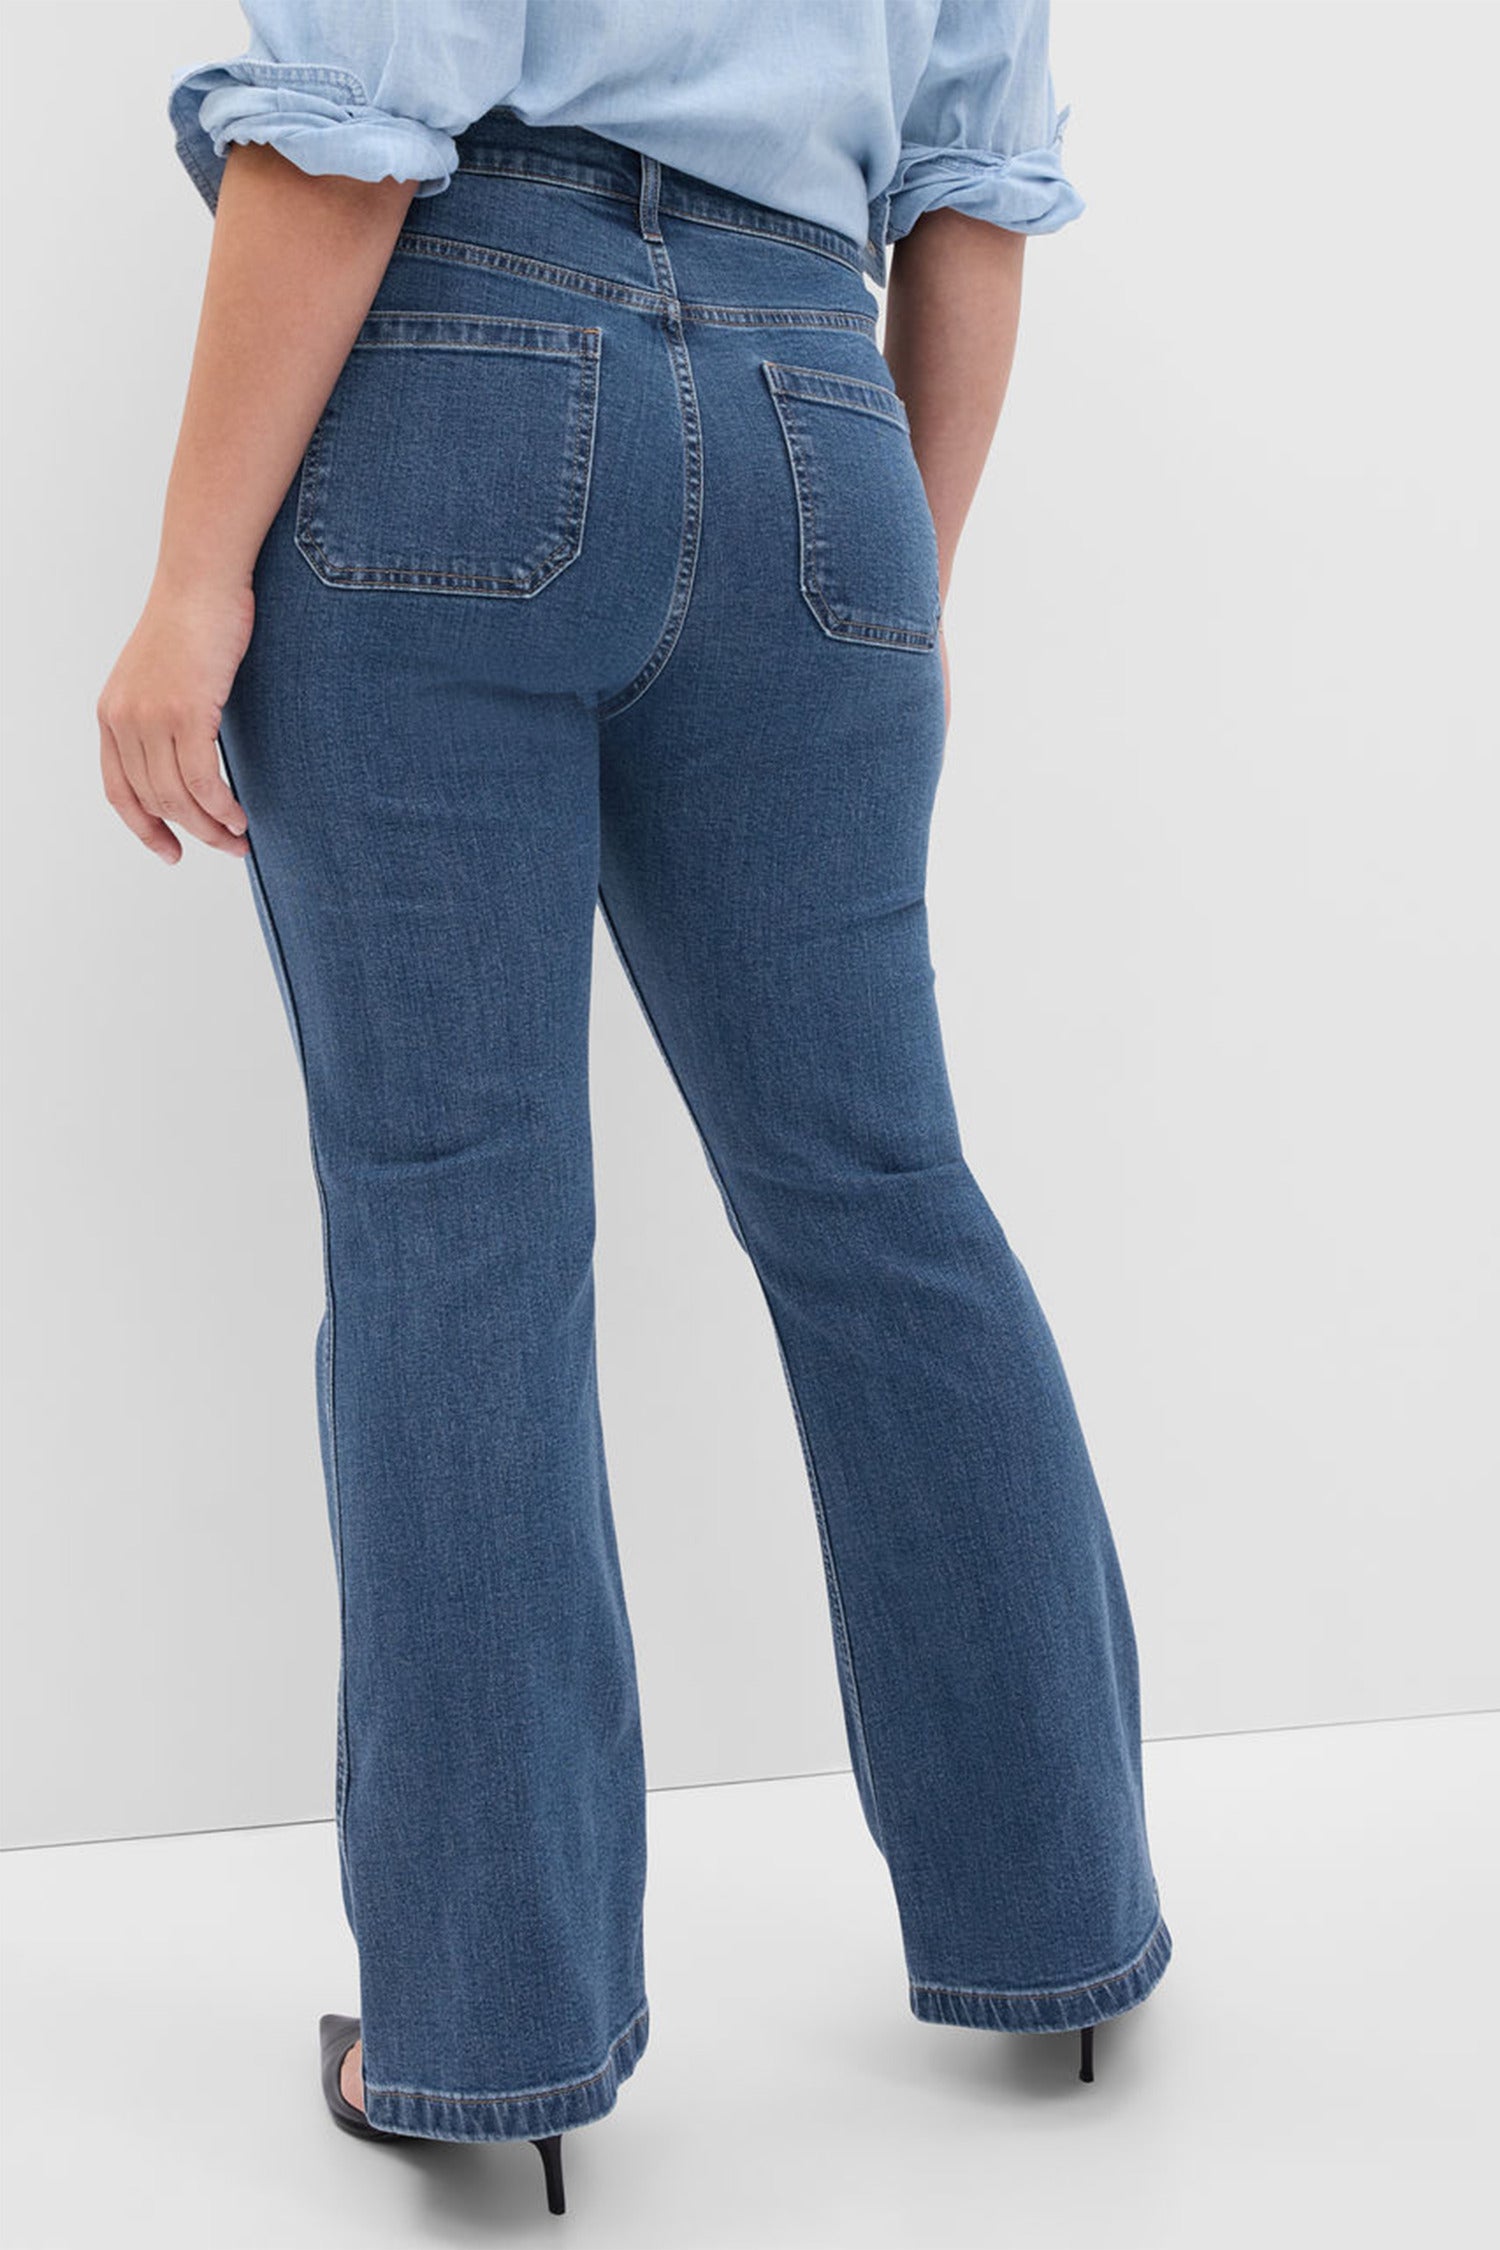 Model wearing blue high rise flare jeans